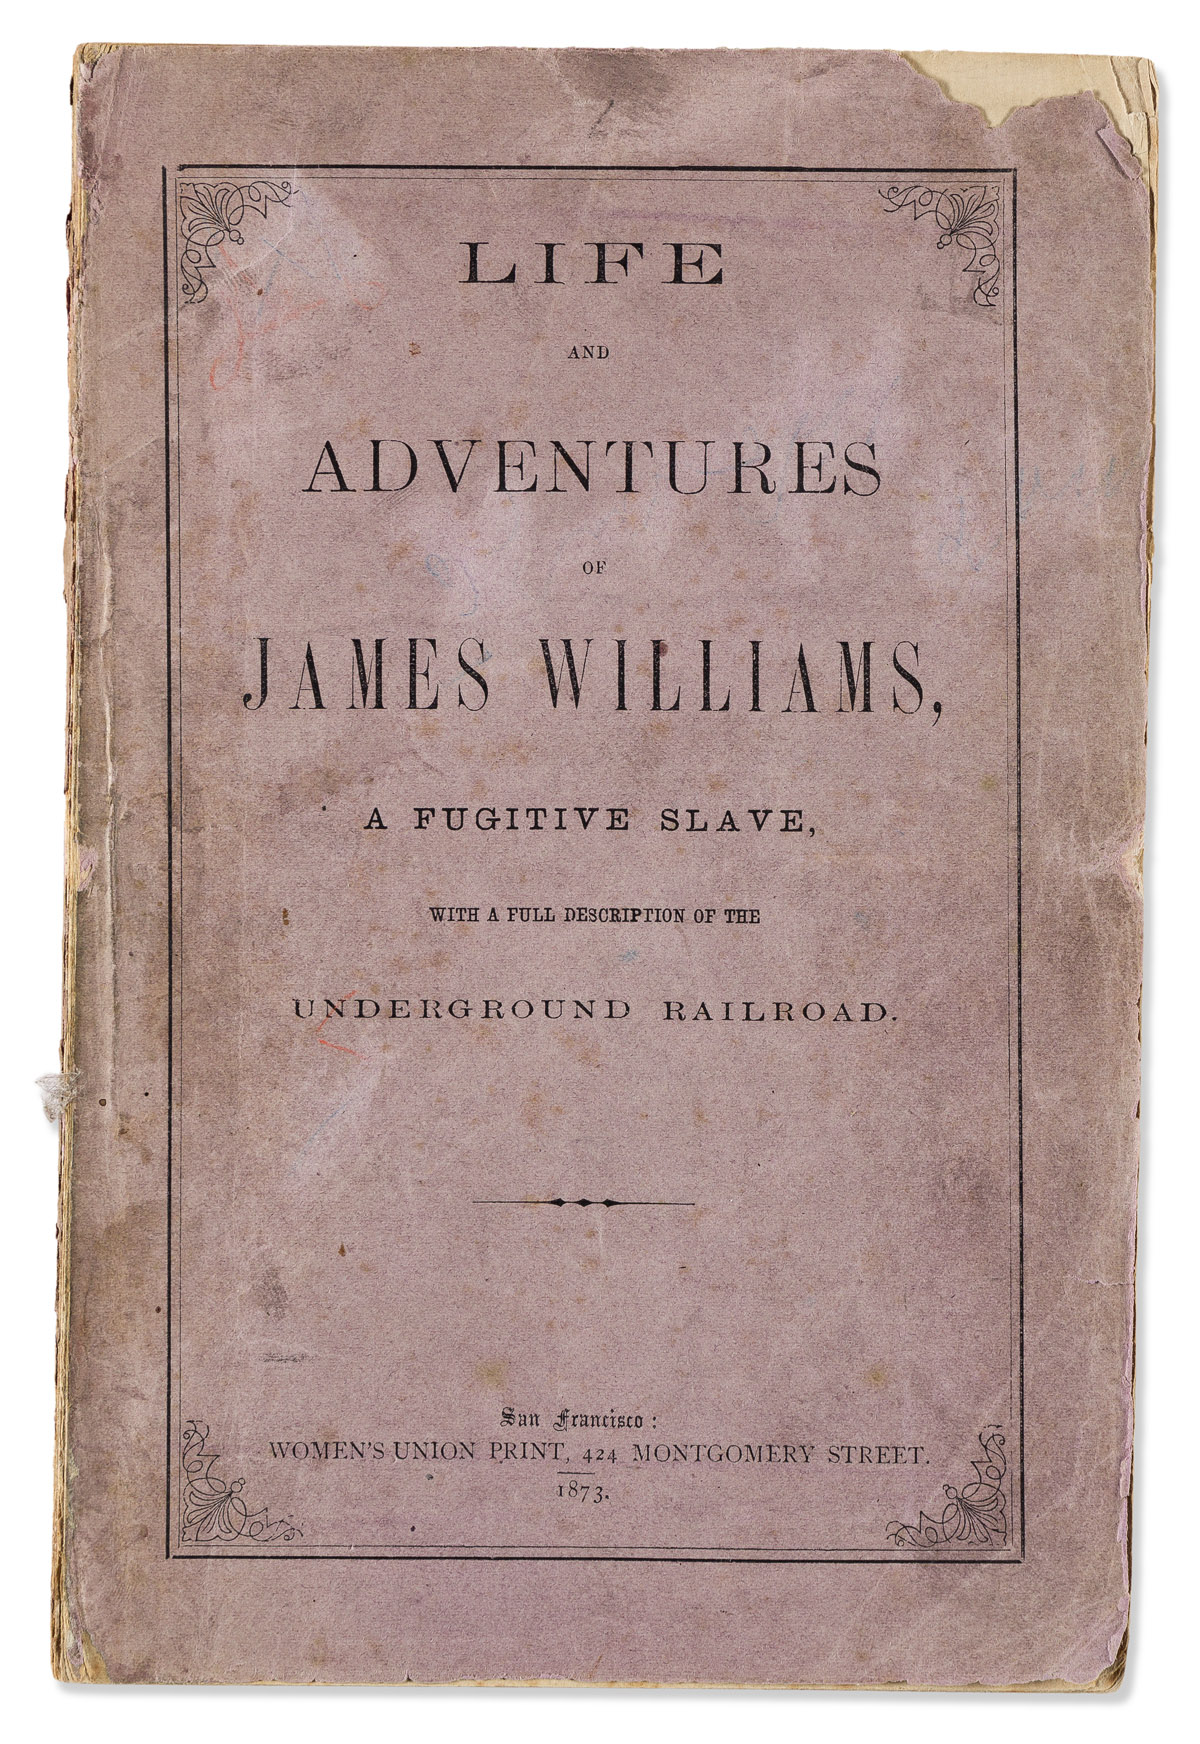 (SLAVERY & ABOLITION.) James Williams. Life and Adventures of . . . a Fugitive Slave, with a Full Description of the Underground